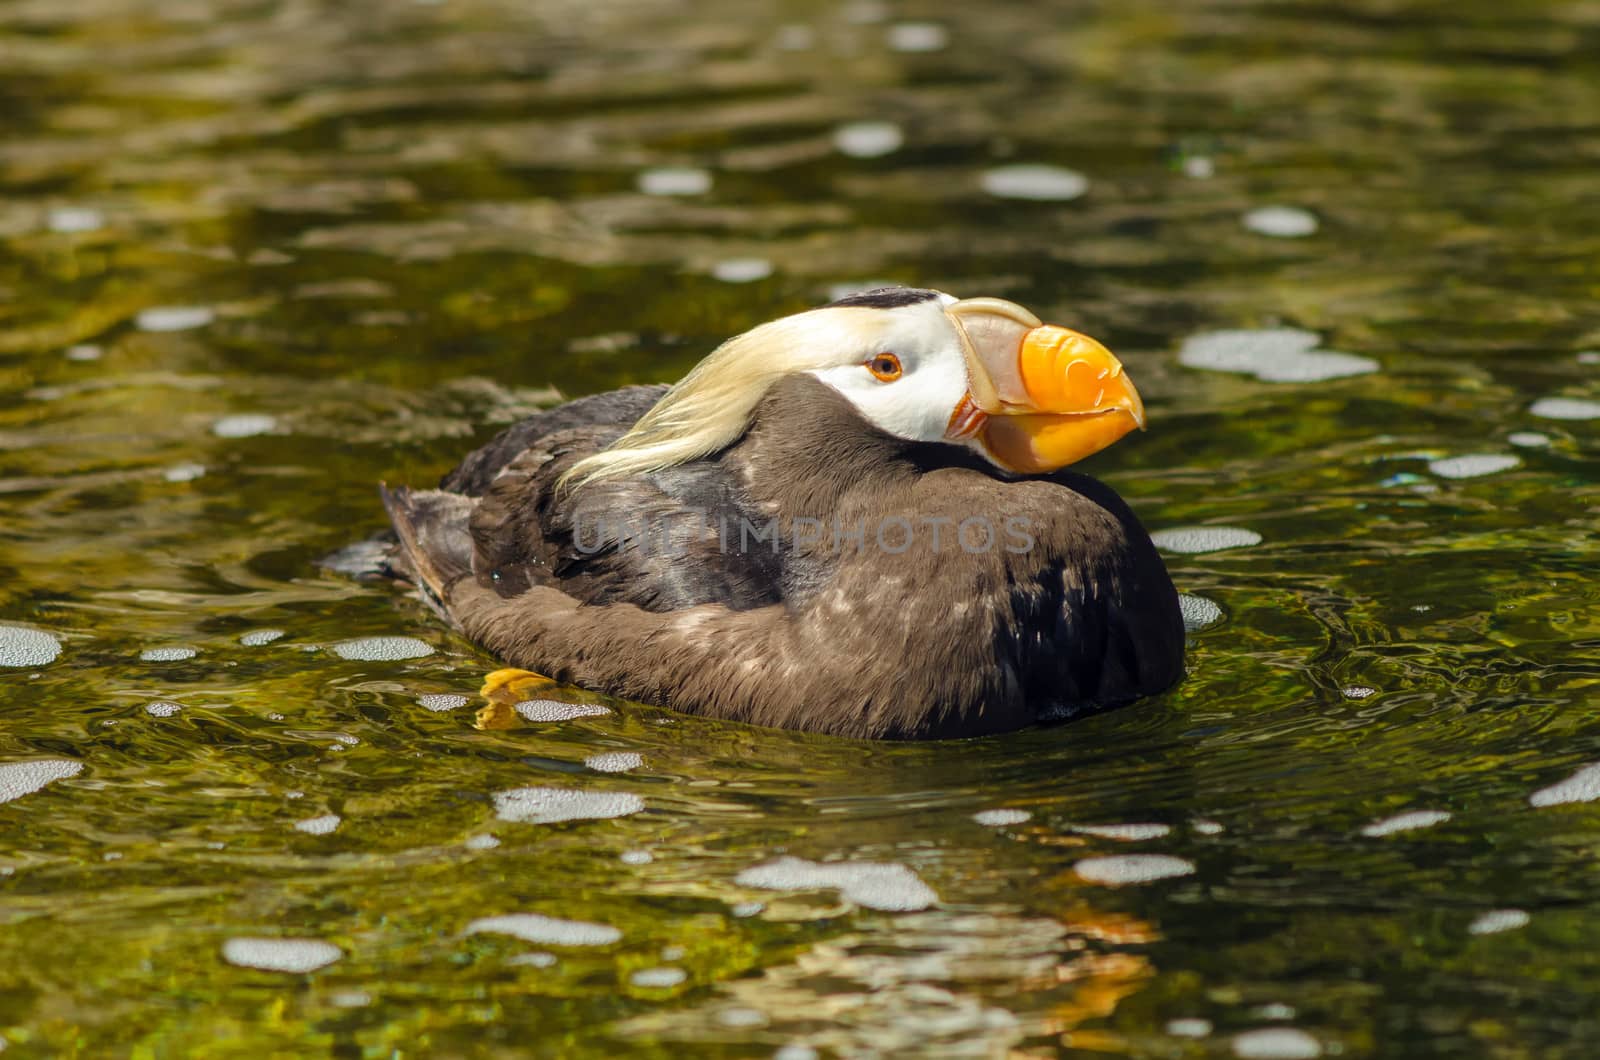 Tufted Puffin in Water by jkraft5